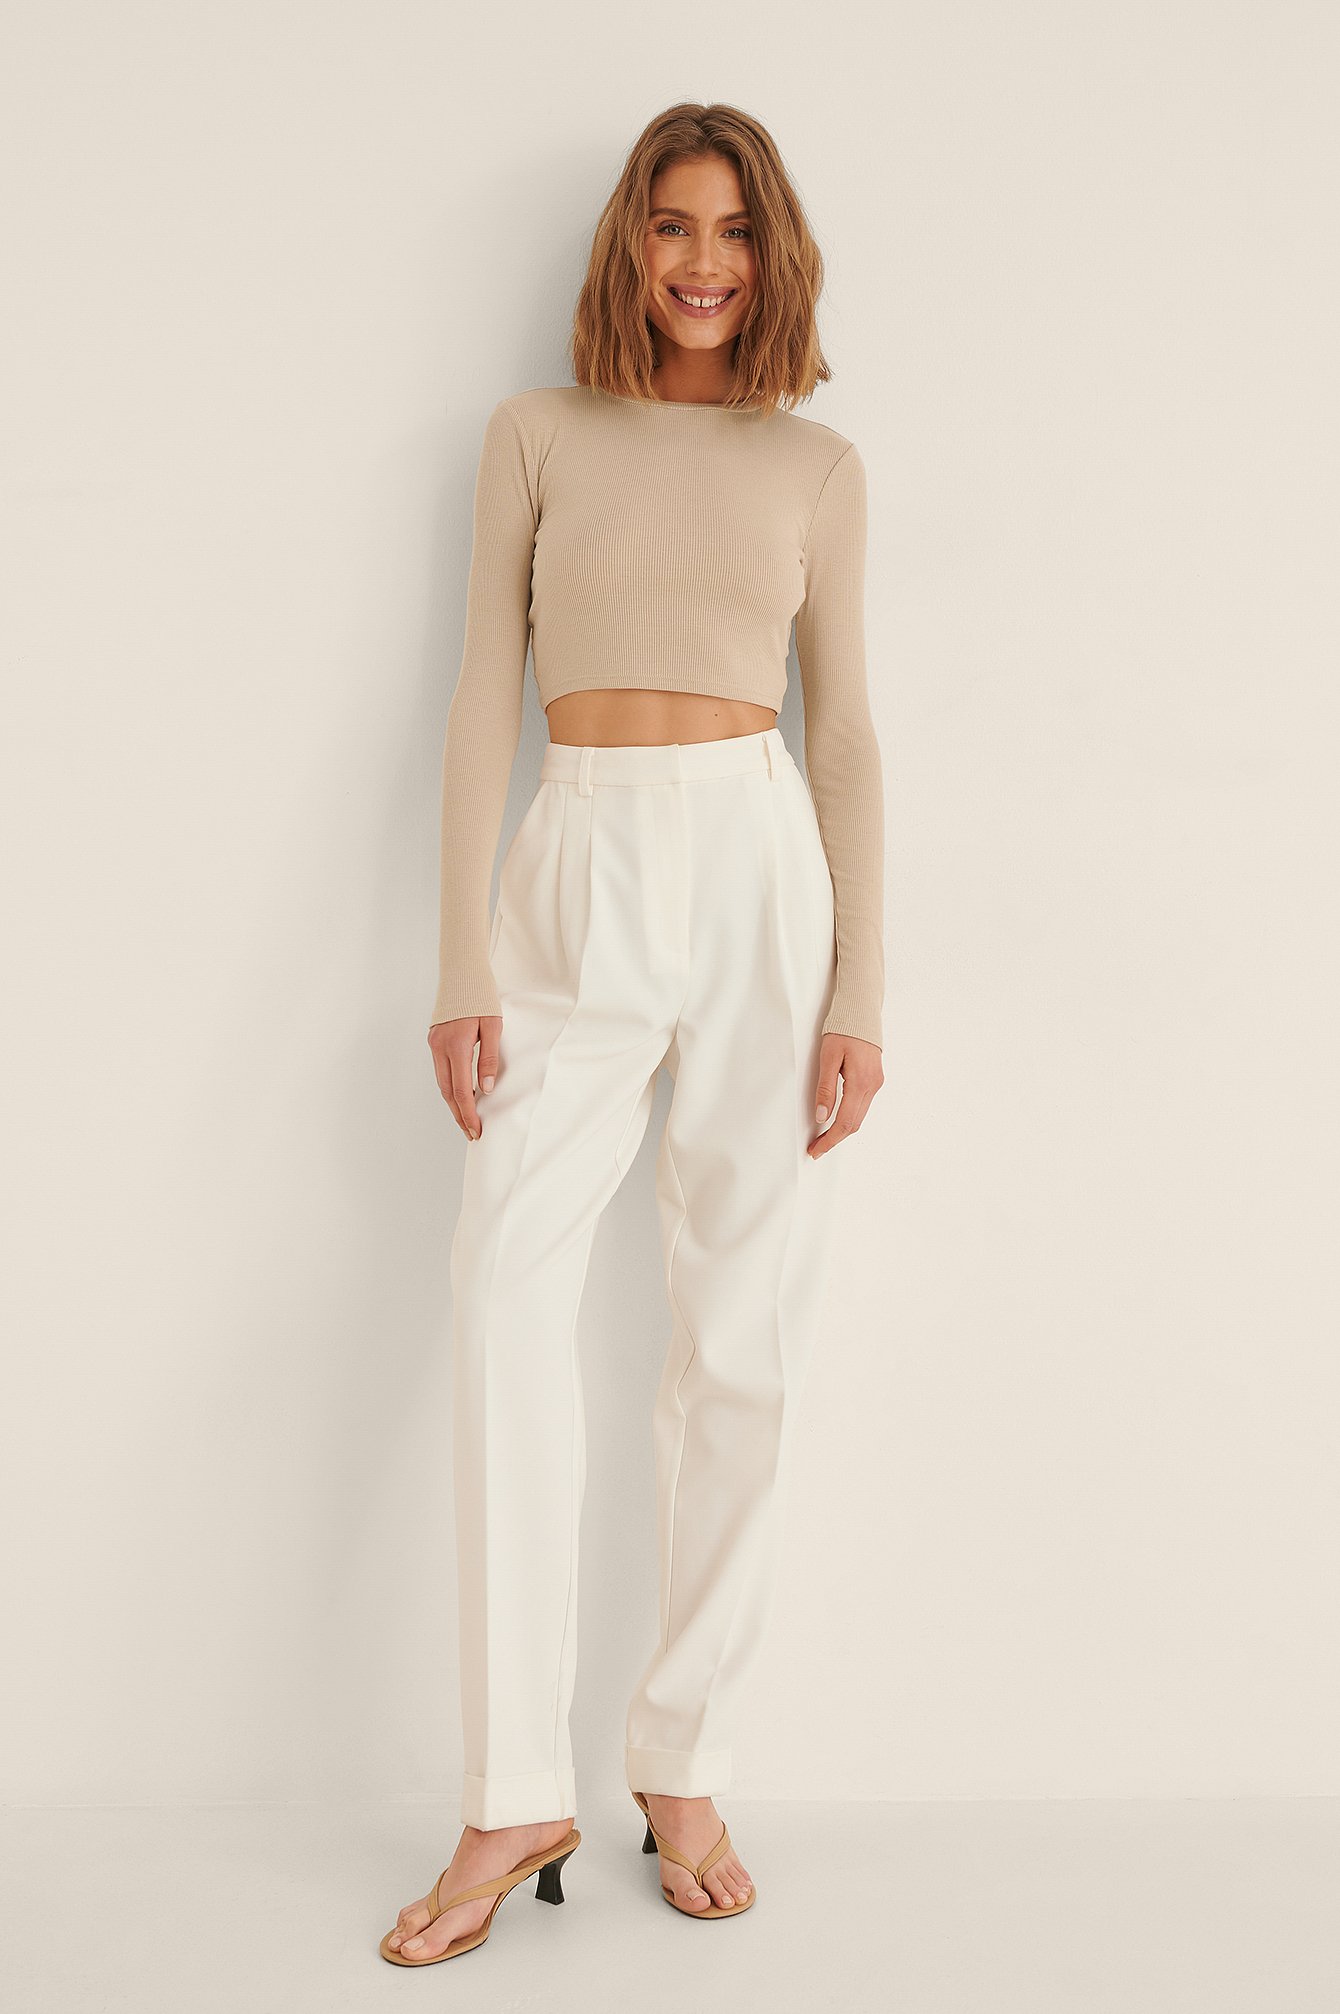 Recycled Round Neck Ribbed Long Sleeve Crop Top Outfit.